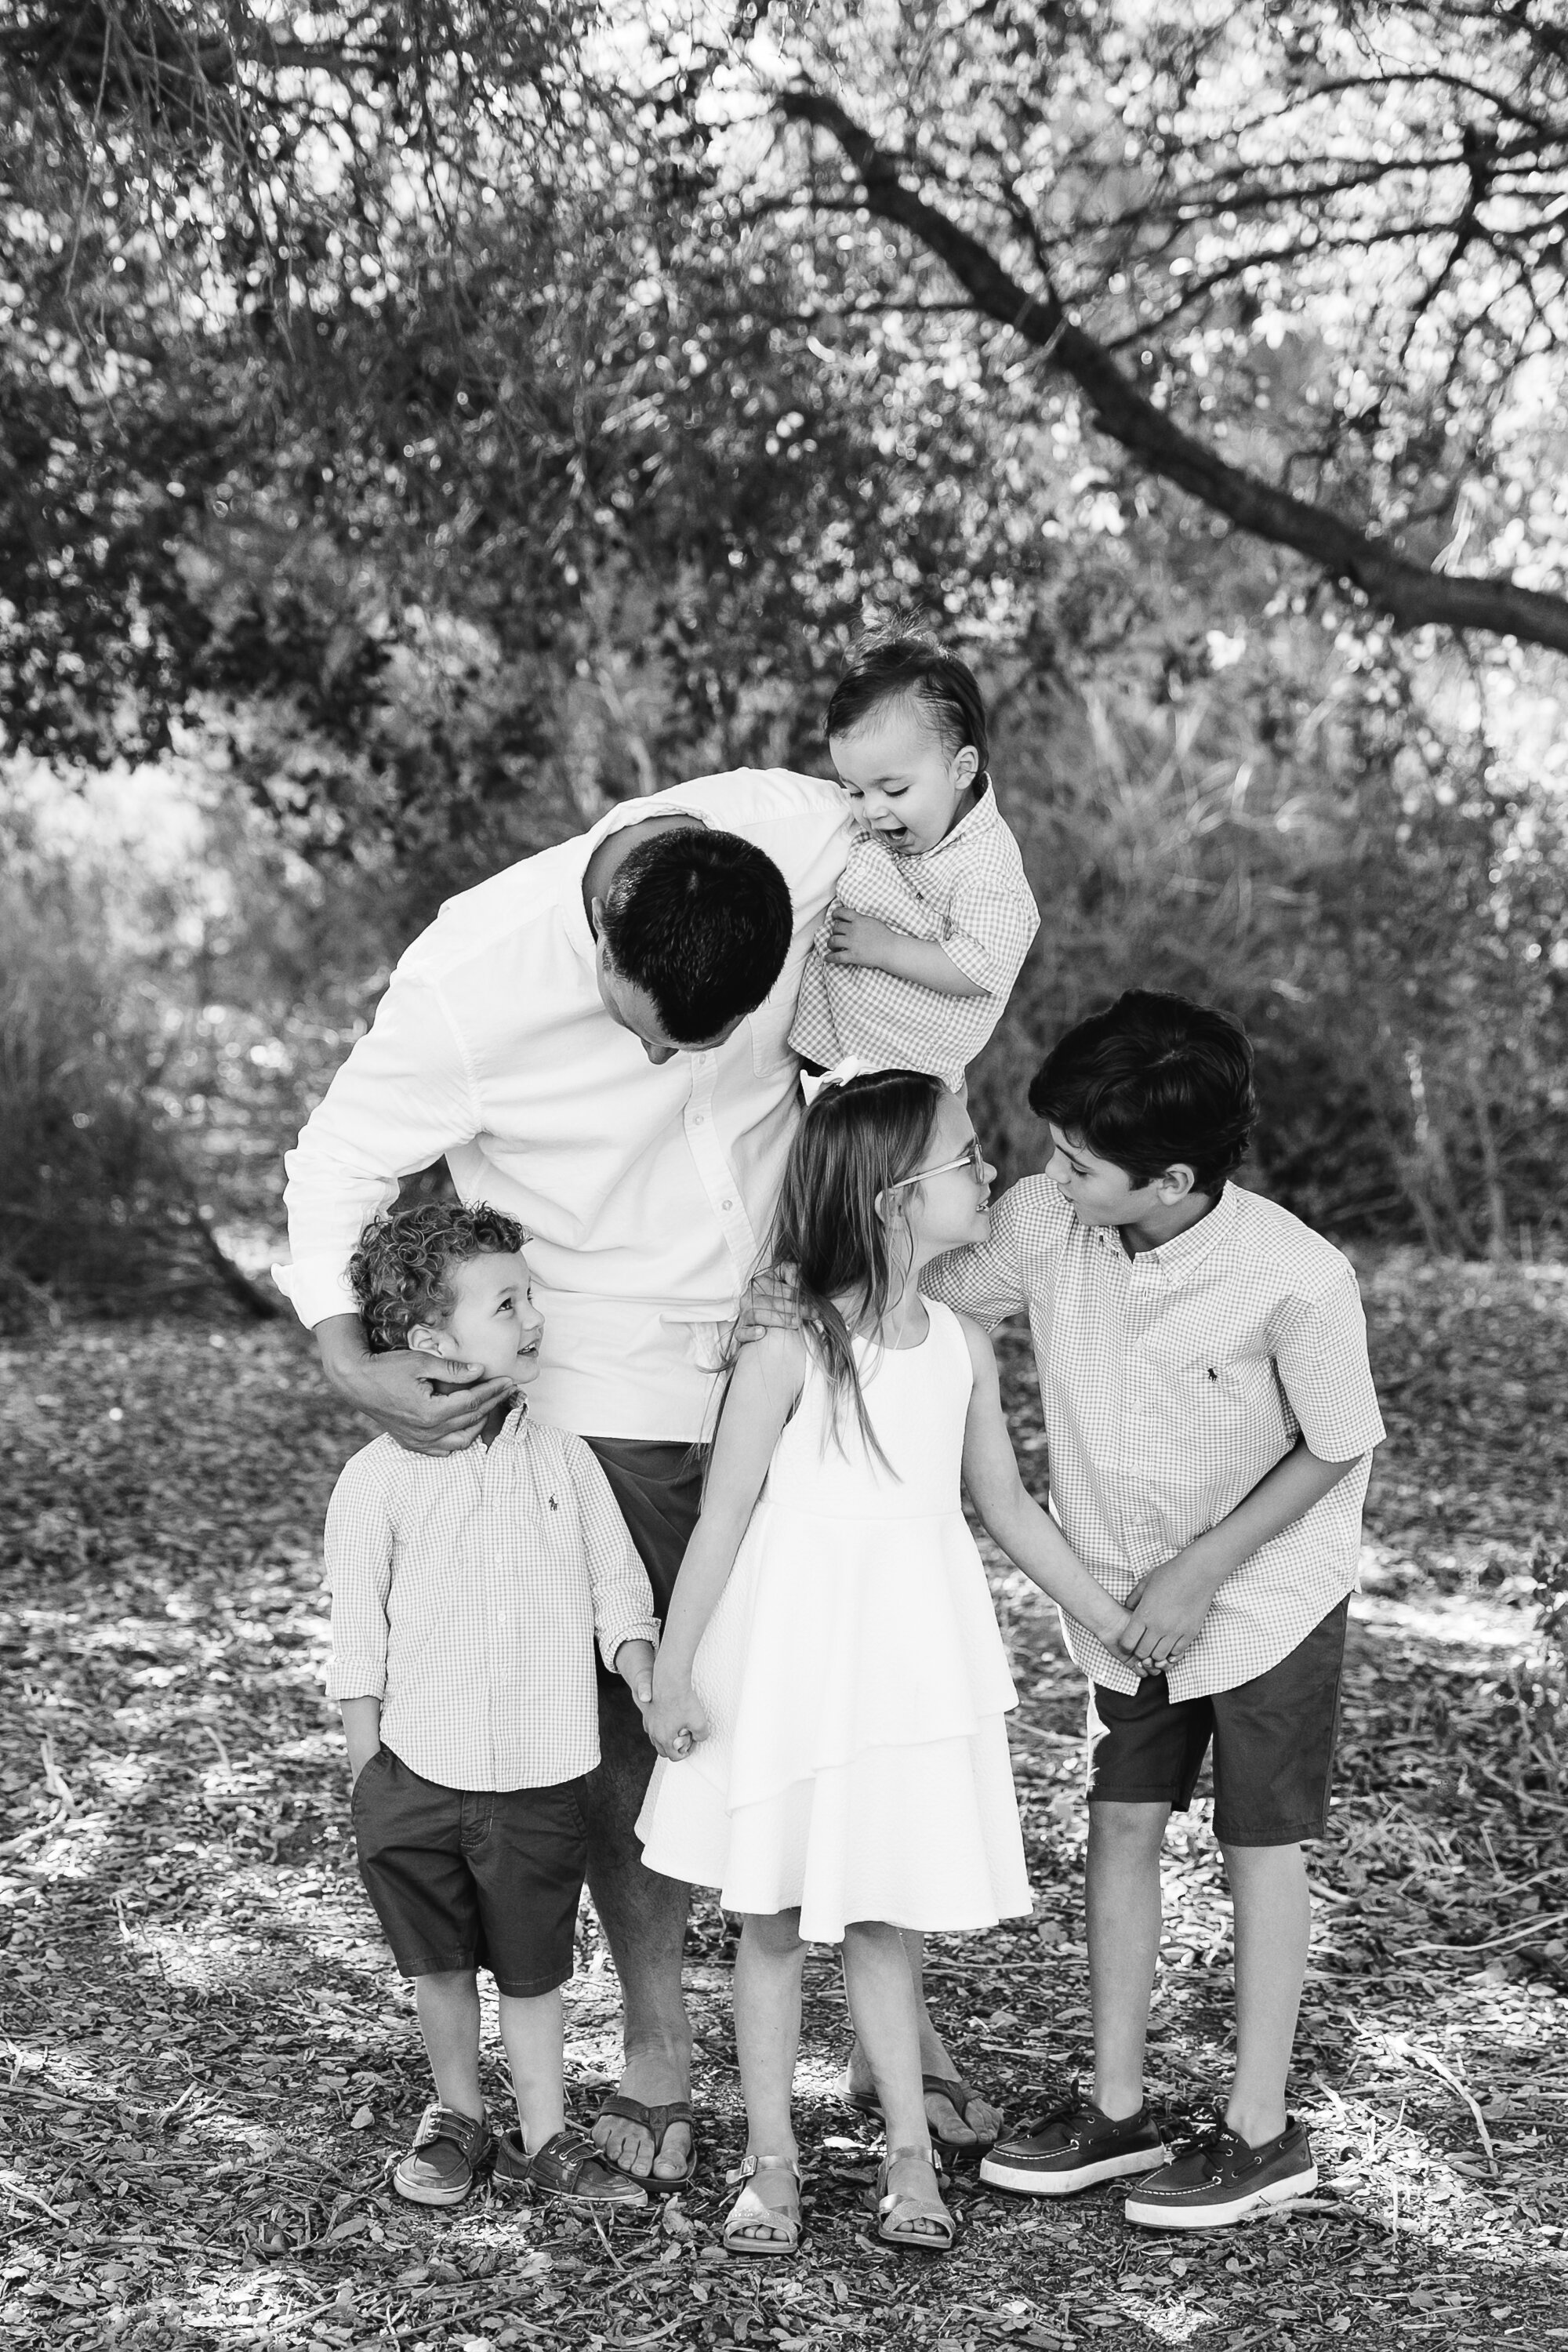 Los_Angeles_Family_Photography_Orange_County_Children_Babies_Field_Farm_Outdoors_Morning_Session_California_Girls_Boys_Kids_Photography-0270.jpg